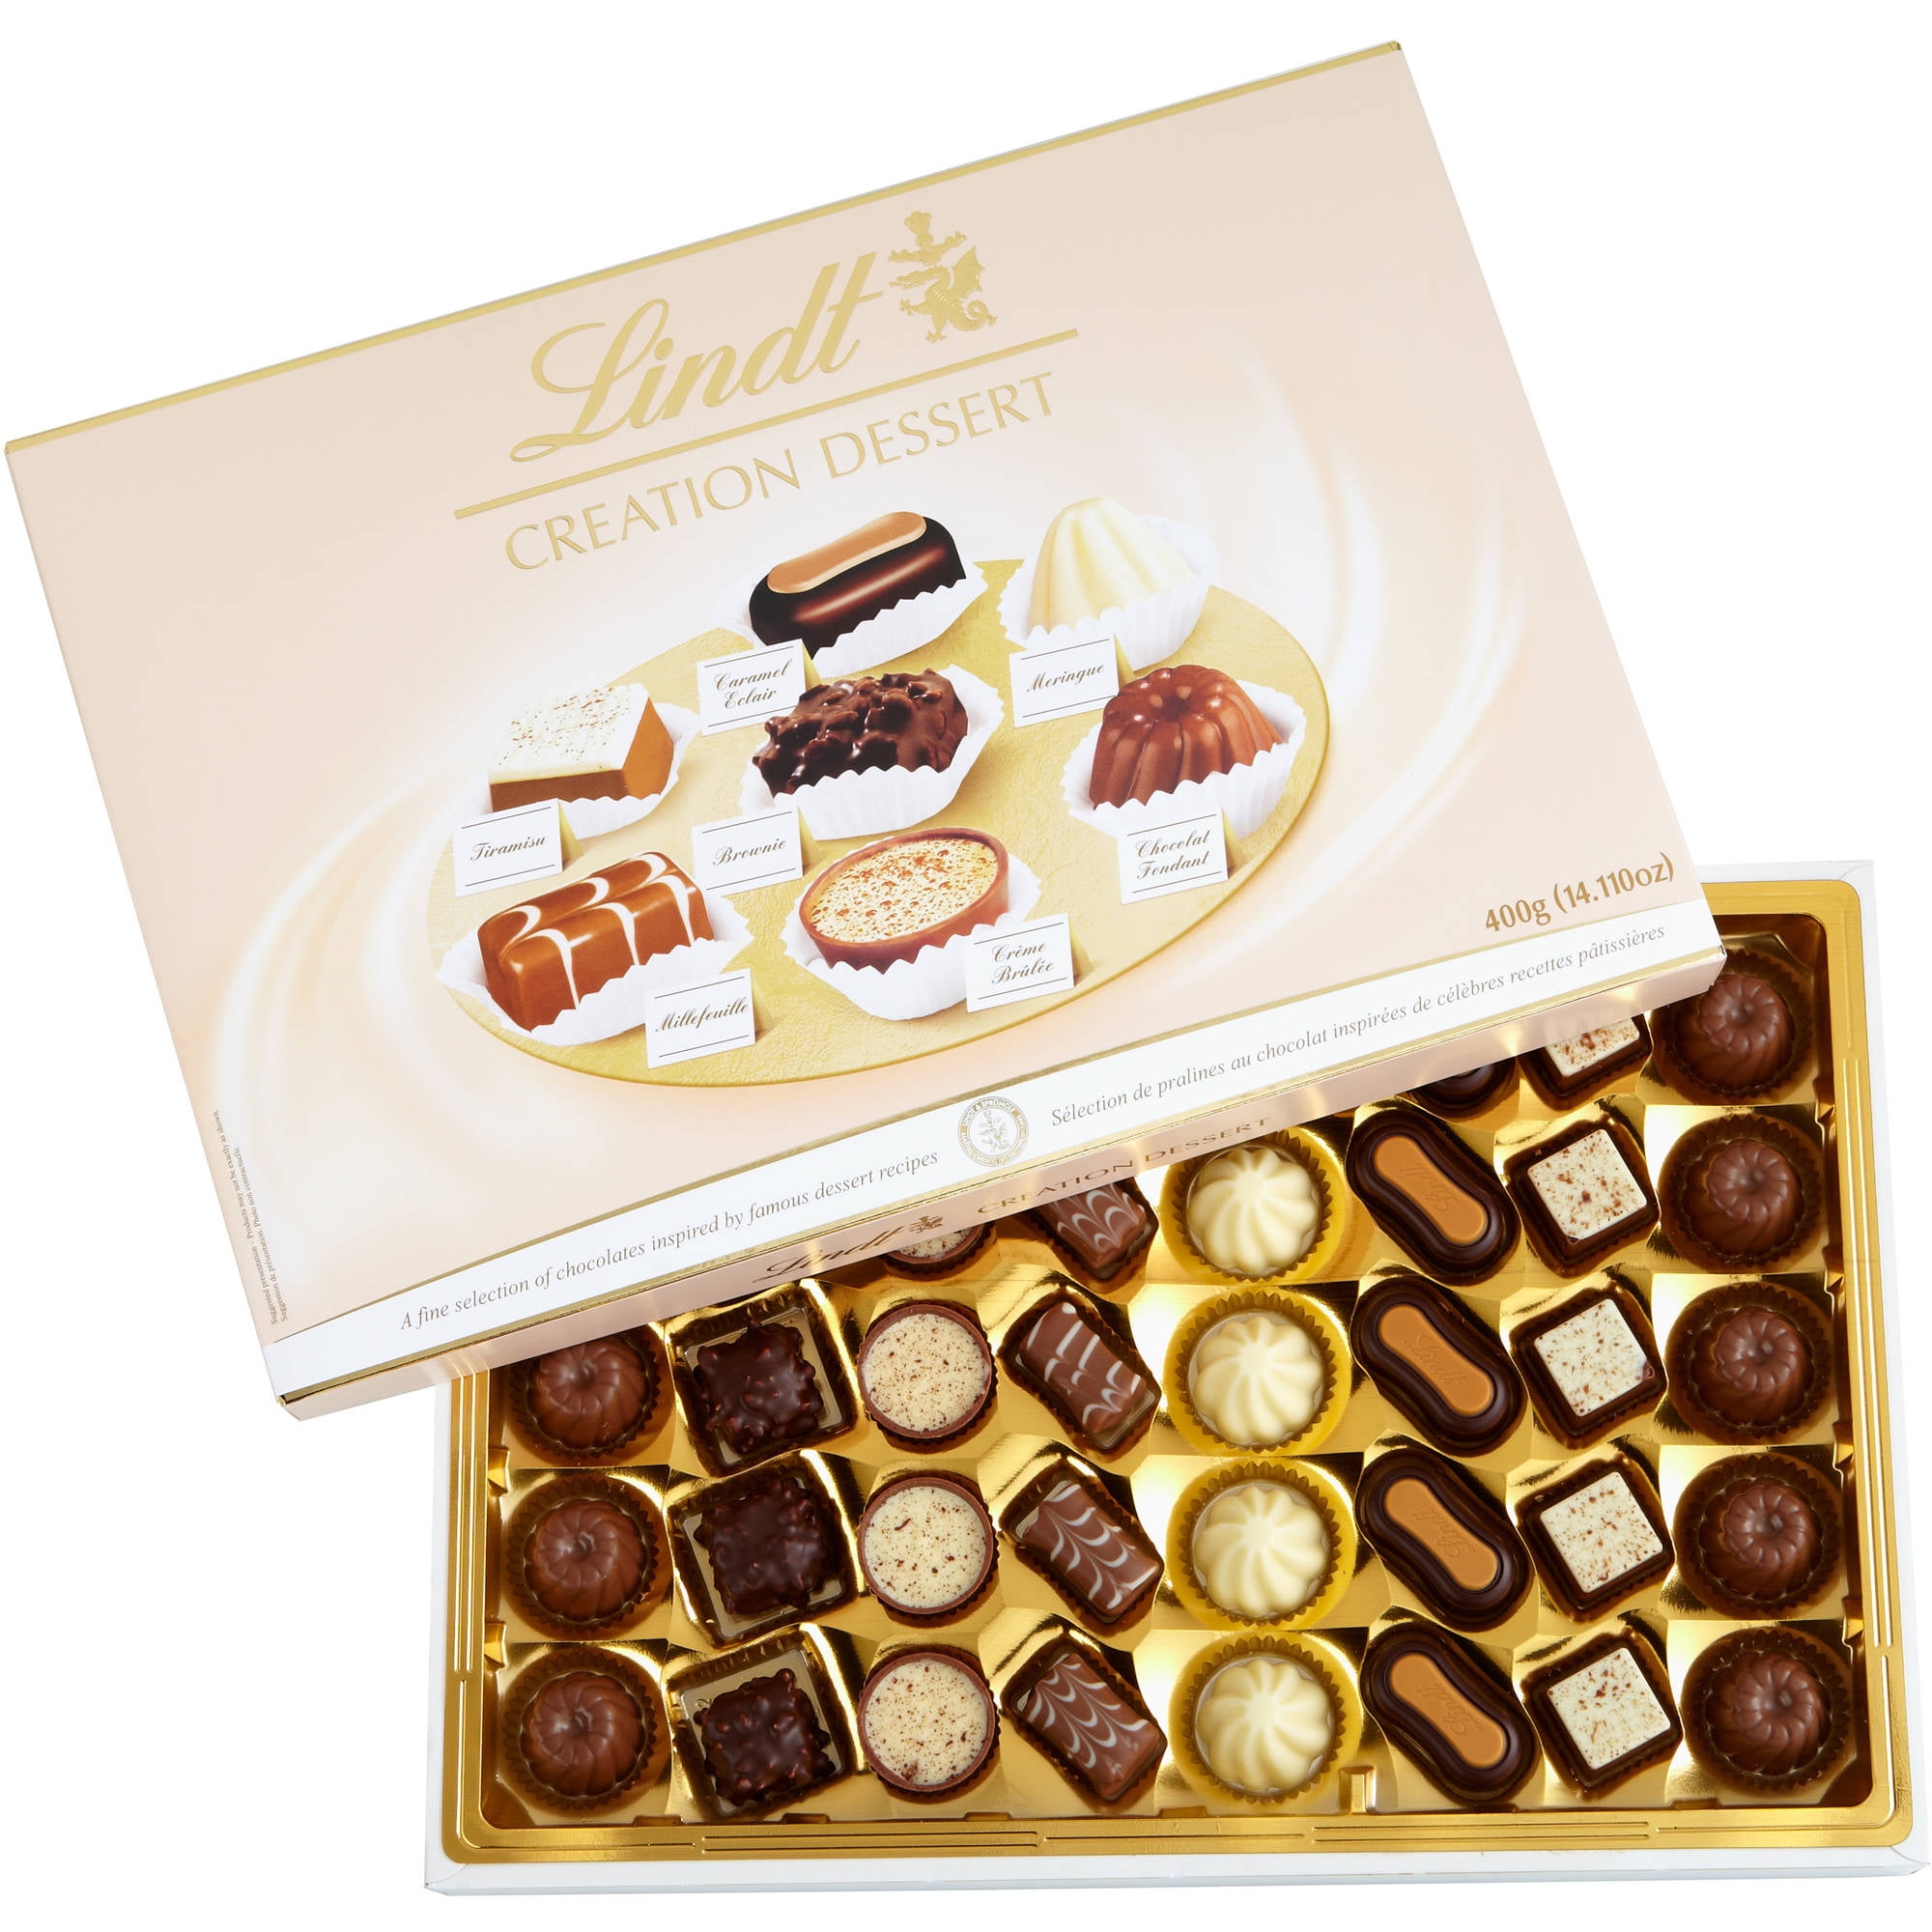 Lindt Creation Dessert, Assorted Chocolate Gift Ballotin 20 Count, 193grams